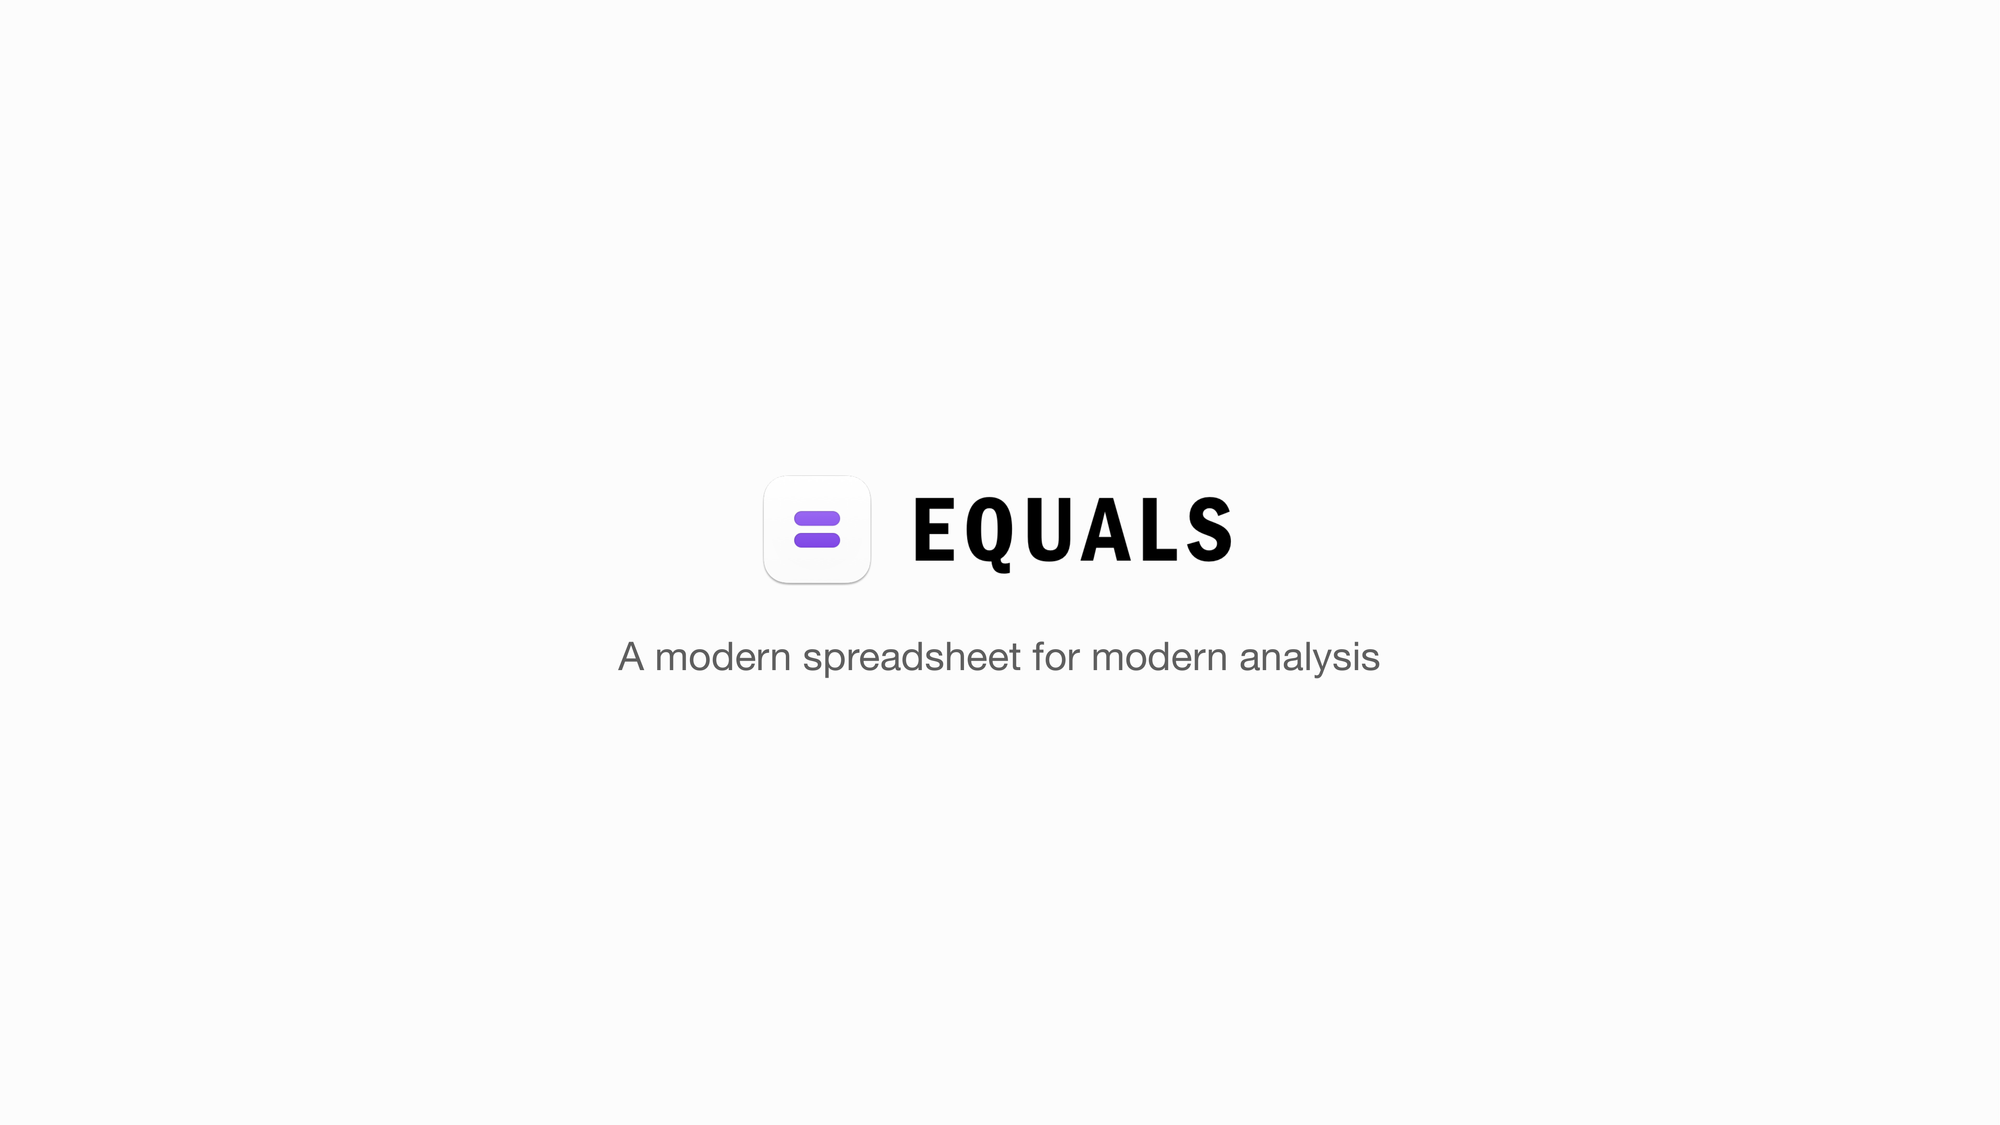 Equals 10-page Seed Round Deck that Raised $6.6M